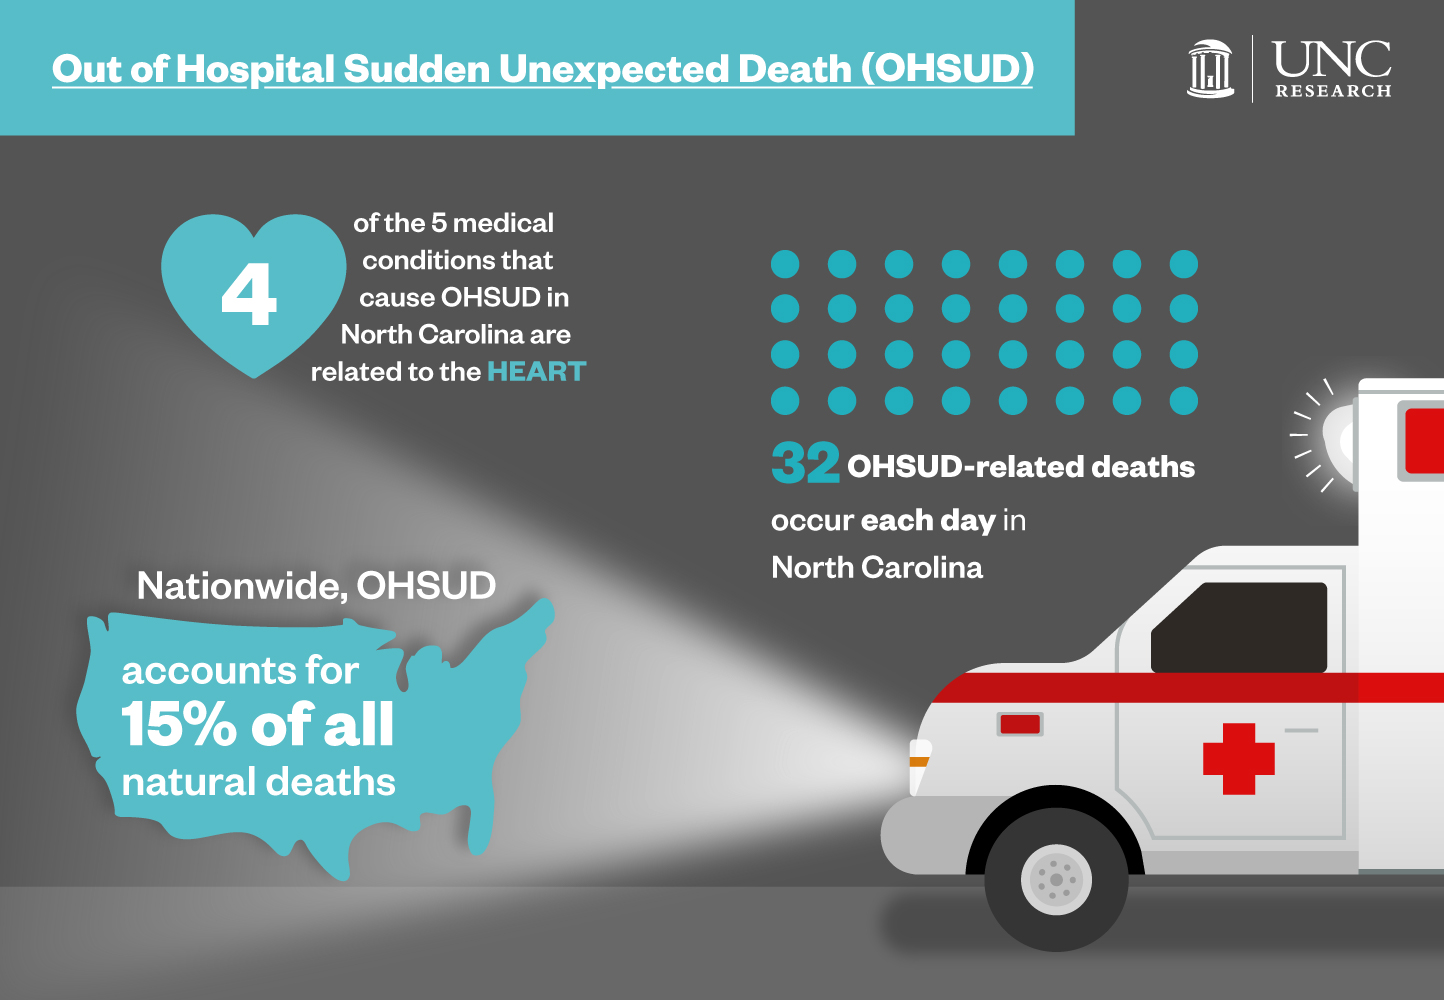 Infographic for Out of Hospital Sudden Unexpected Death (also known as OHSUD). 4 of the 5 medical conditions that cause OHSUD in North Carolina are related to the heart. 32 OHSUD-related deaths occur each day in North Carolina. Nationwide, OHSUD accounts for 15% of all natural deaths.